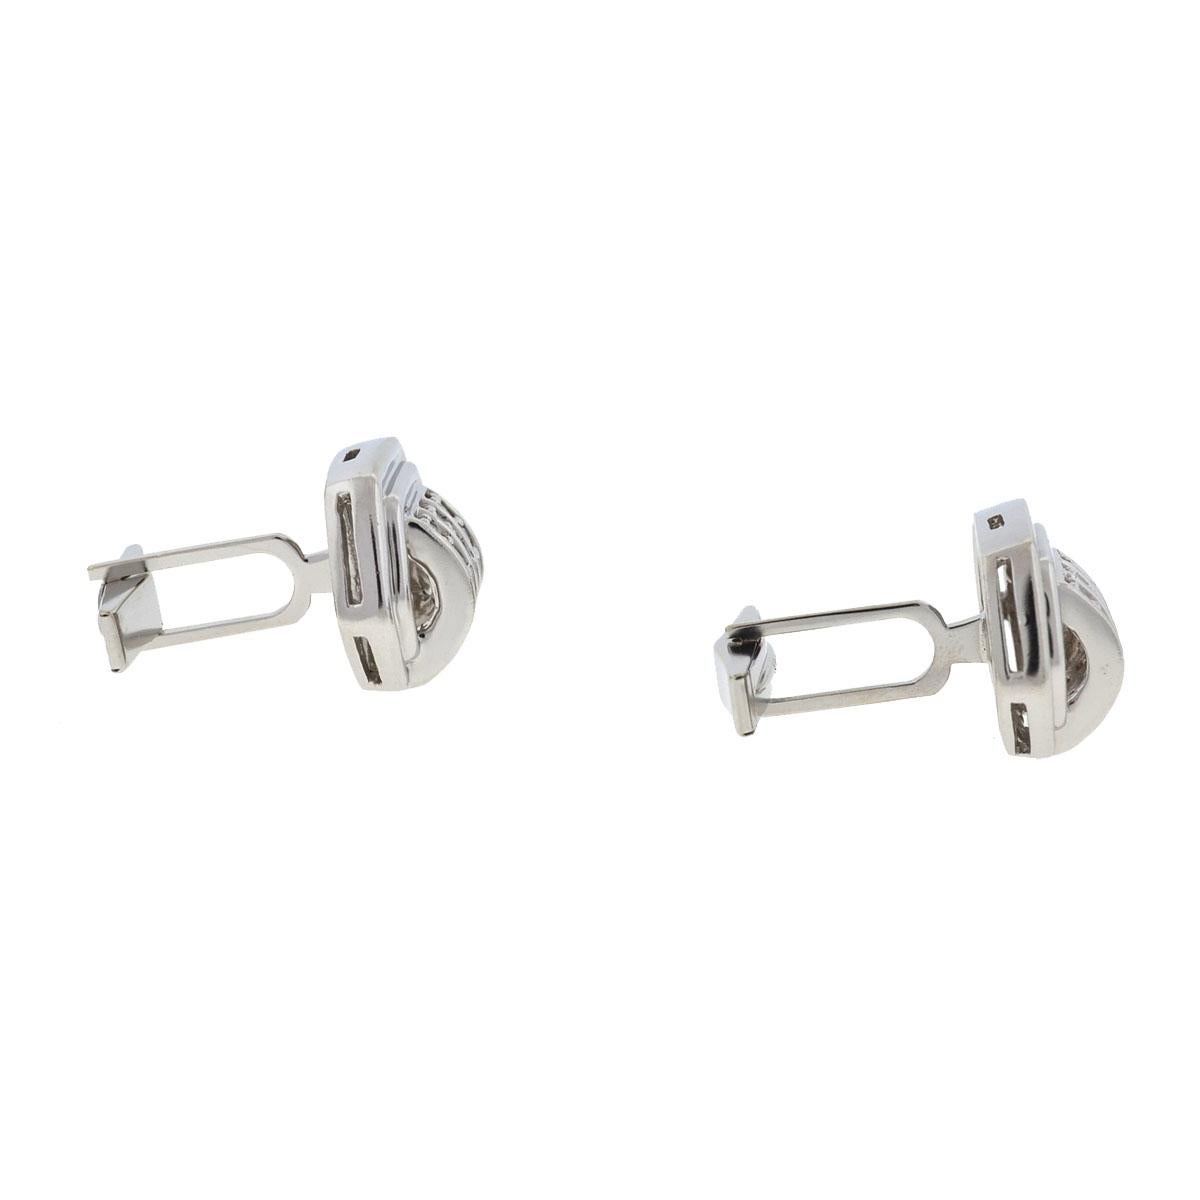 Company-N/A
Style-Cufflink With Three Tiny Rows of Diamonds 
Metal-14k White Gold
Stones-Diamonds - approx. .60 cts tw (.30 Cts Each)
Size -25mm x 20mm
Weight-14.42G 
Includes-Cufflinks ONLY
Sku-7812-5OOM